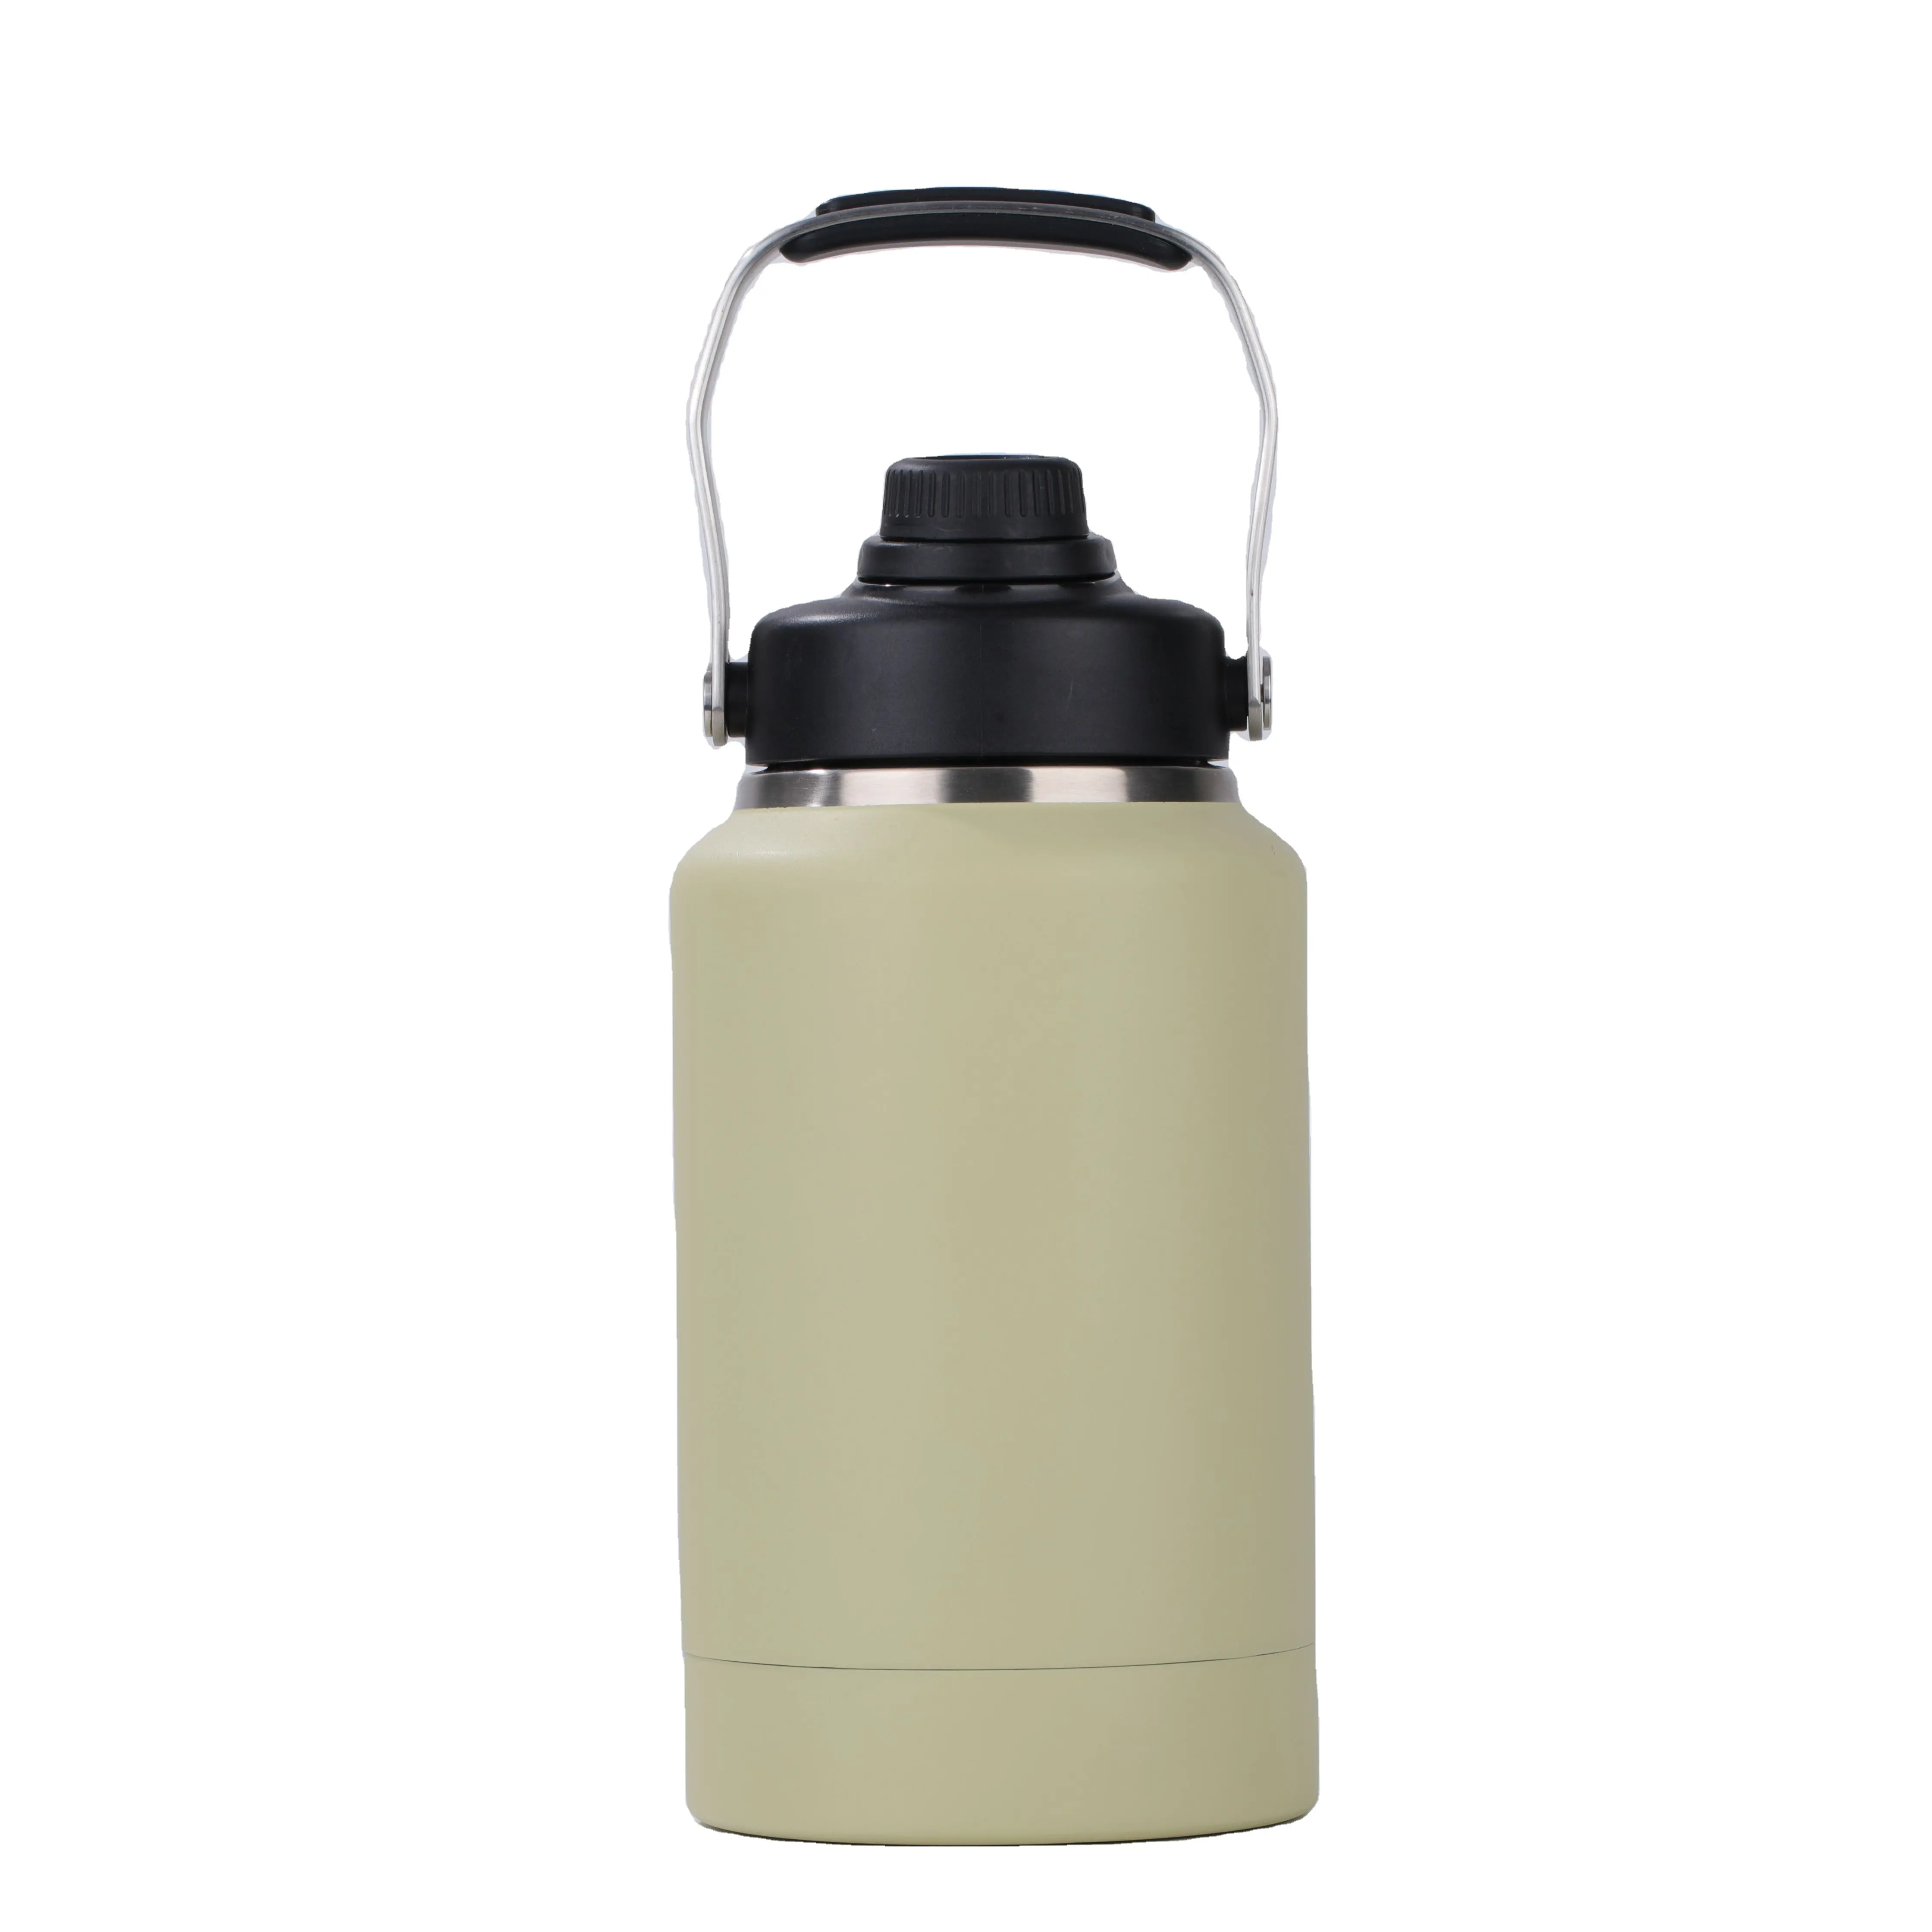 64oz Huge Capacity Stainless Steel Vacuum Insulated Water Bottle with Handle Storage Bowl Bottom Snacks Camping Picnic